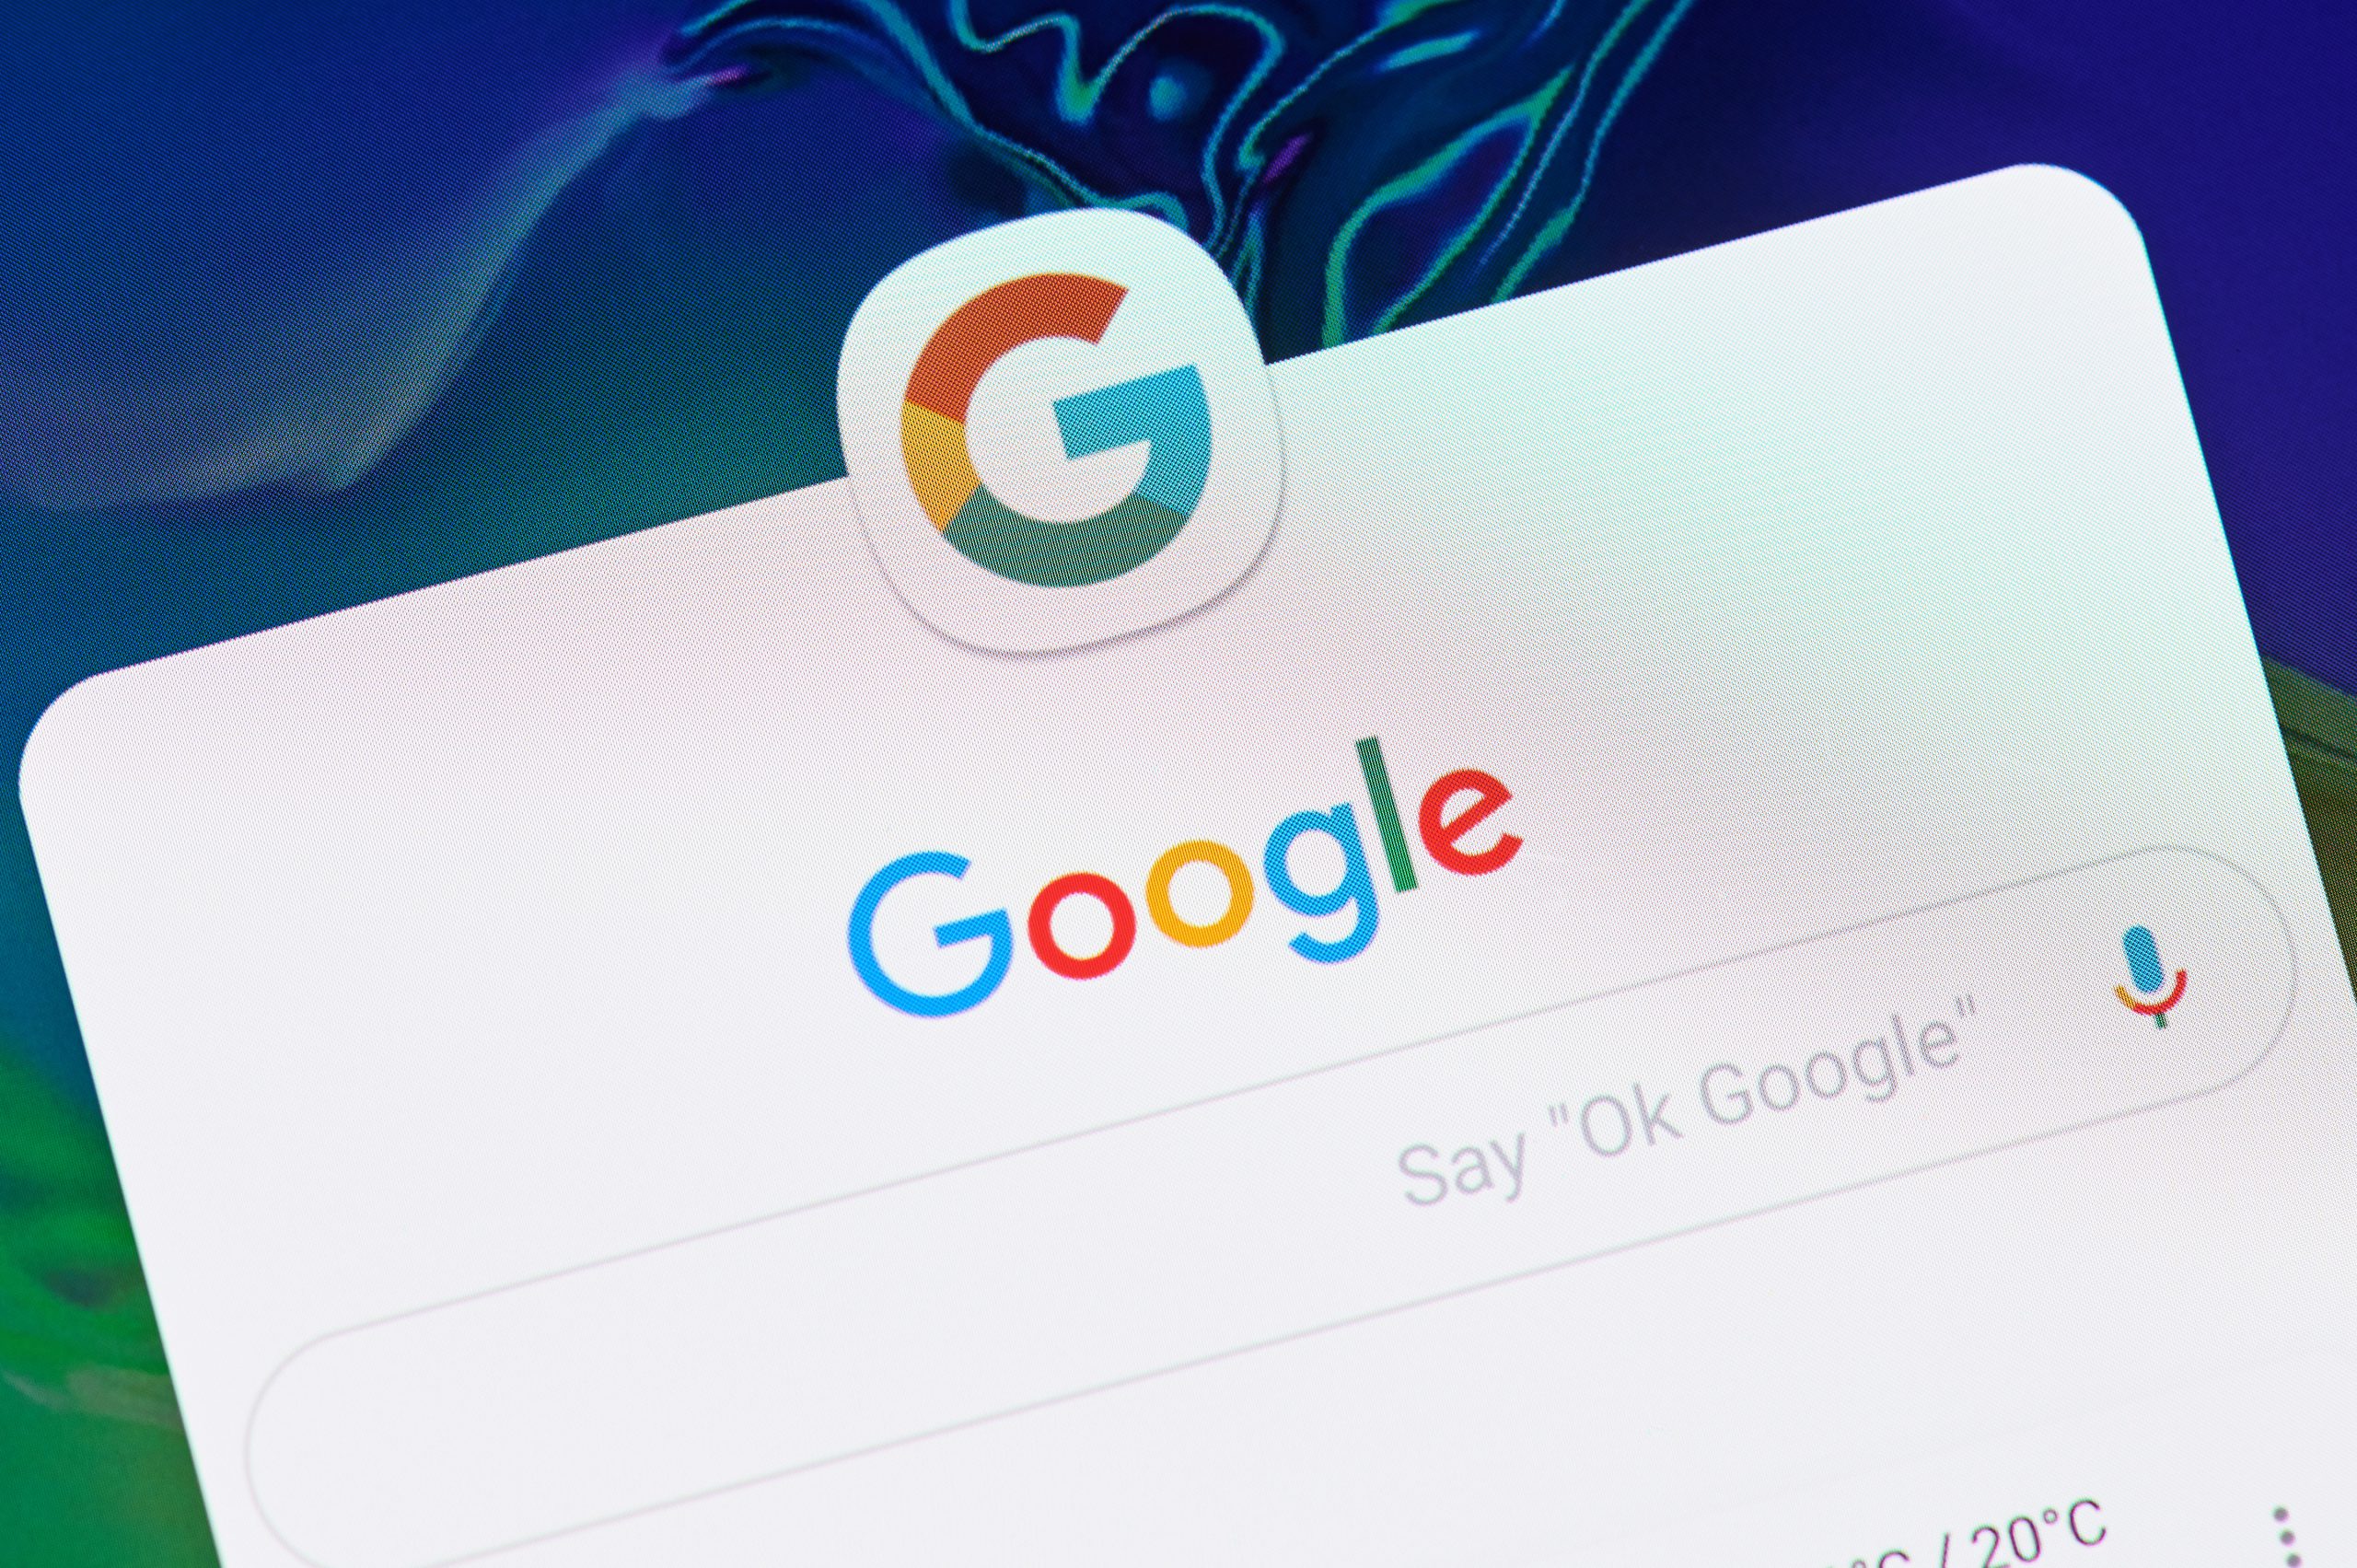 Google search bar for core update, May 2020